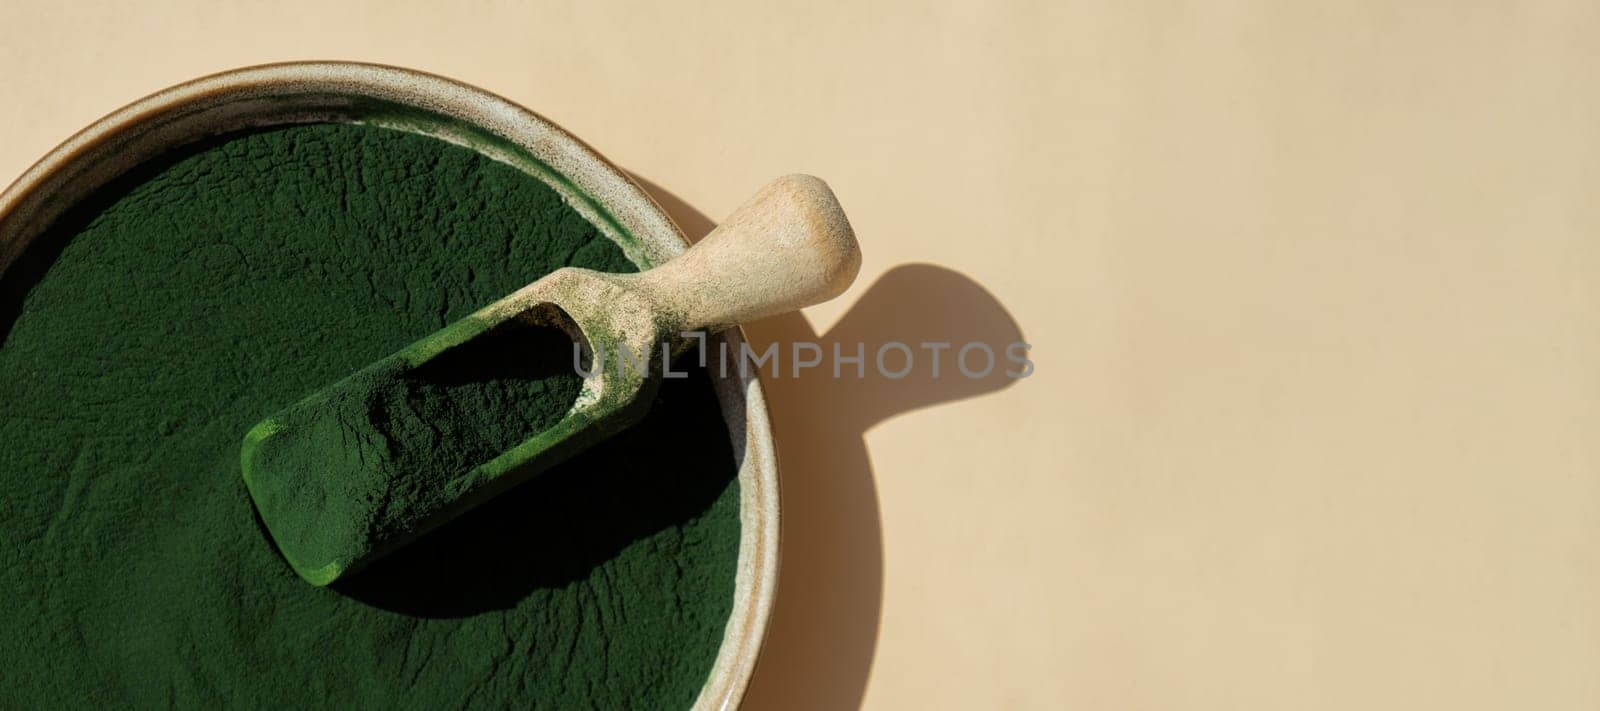 Natural organic green spirulina algae powder in bowl and wooden spoon on neutral background. Chlorella seaweed vegan superfood supplement source and detox. Copy space Healthy nutritional antioxidant concept